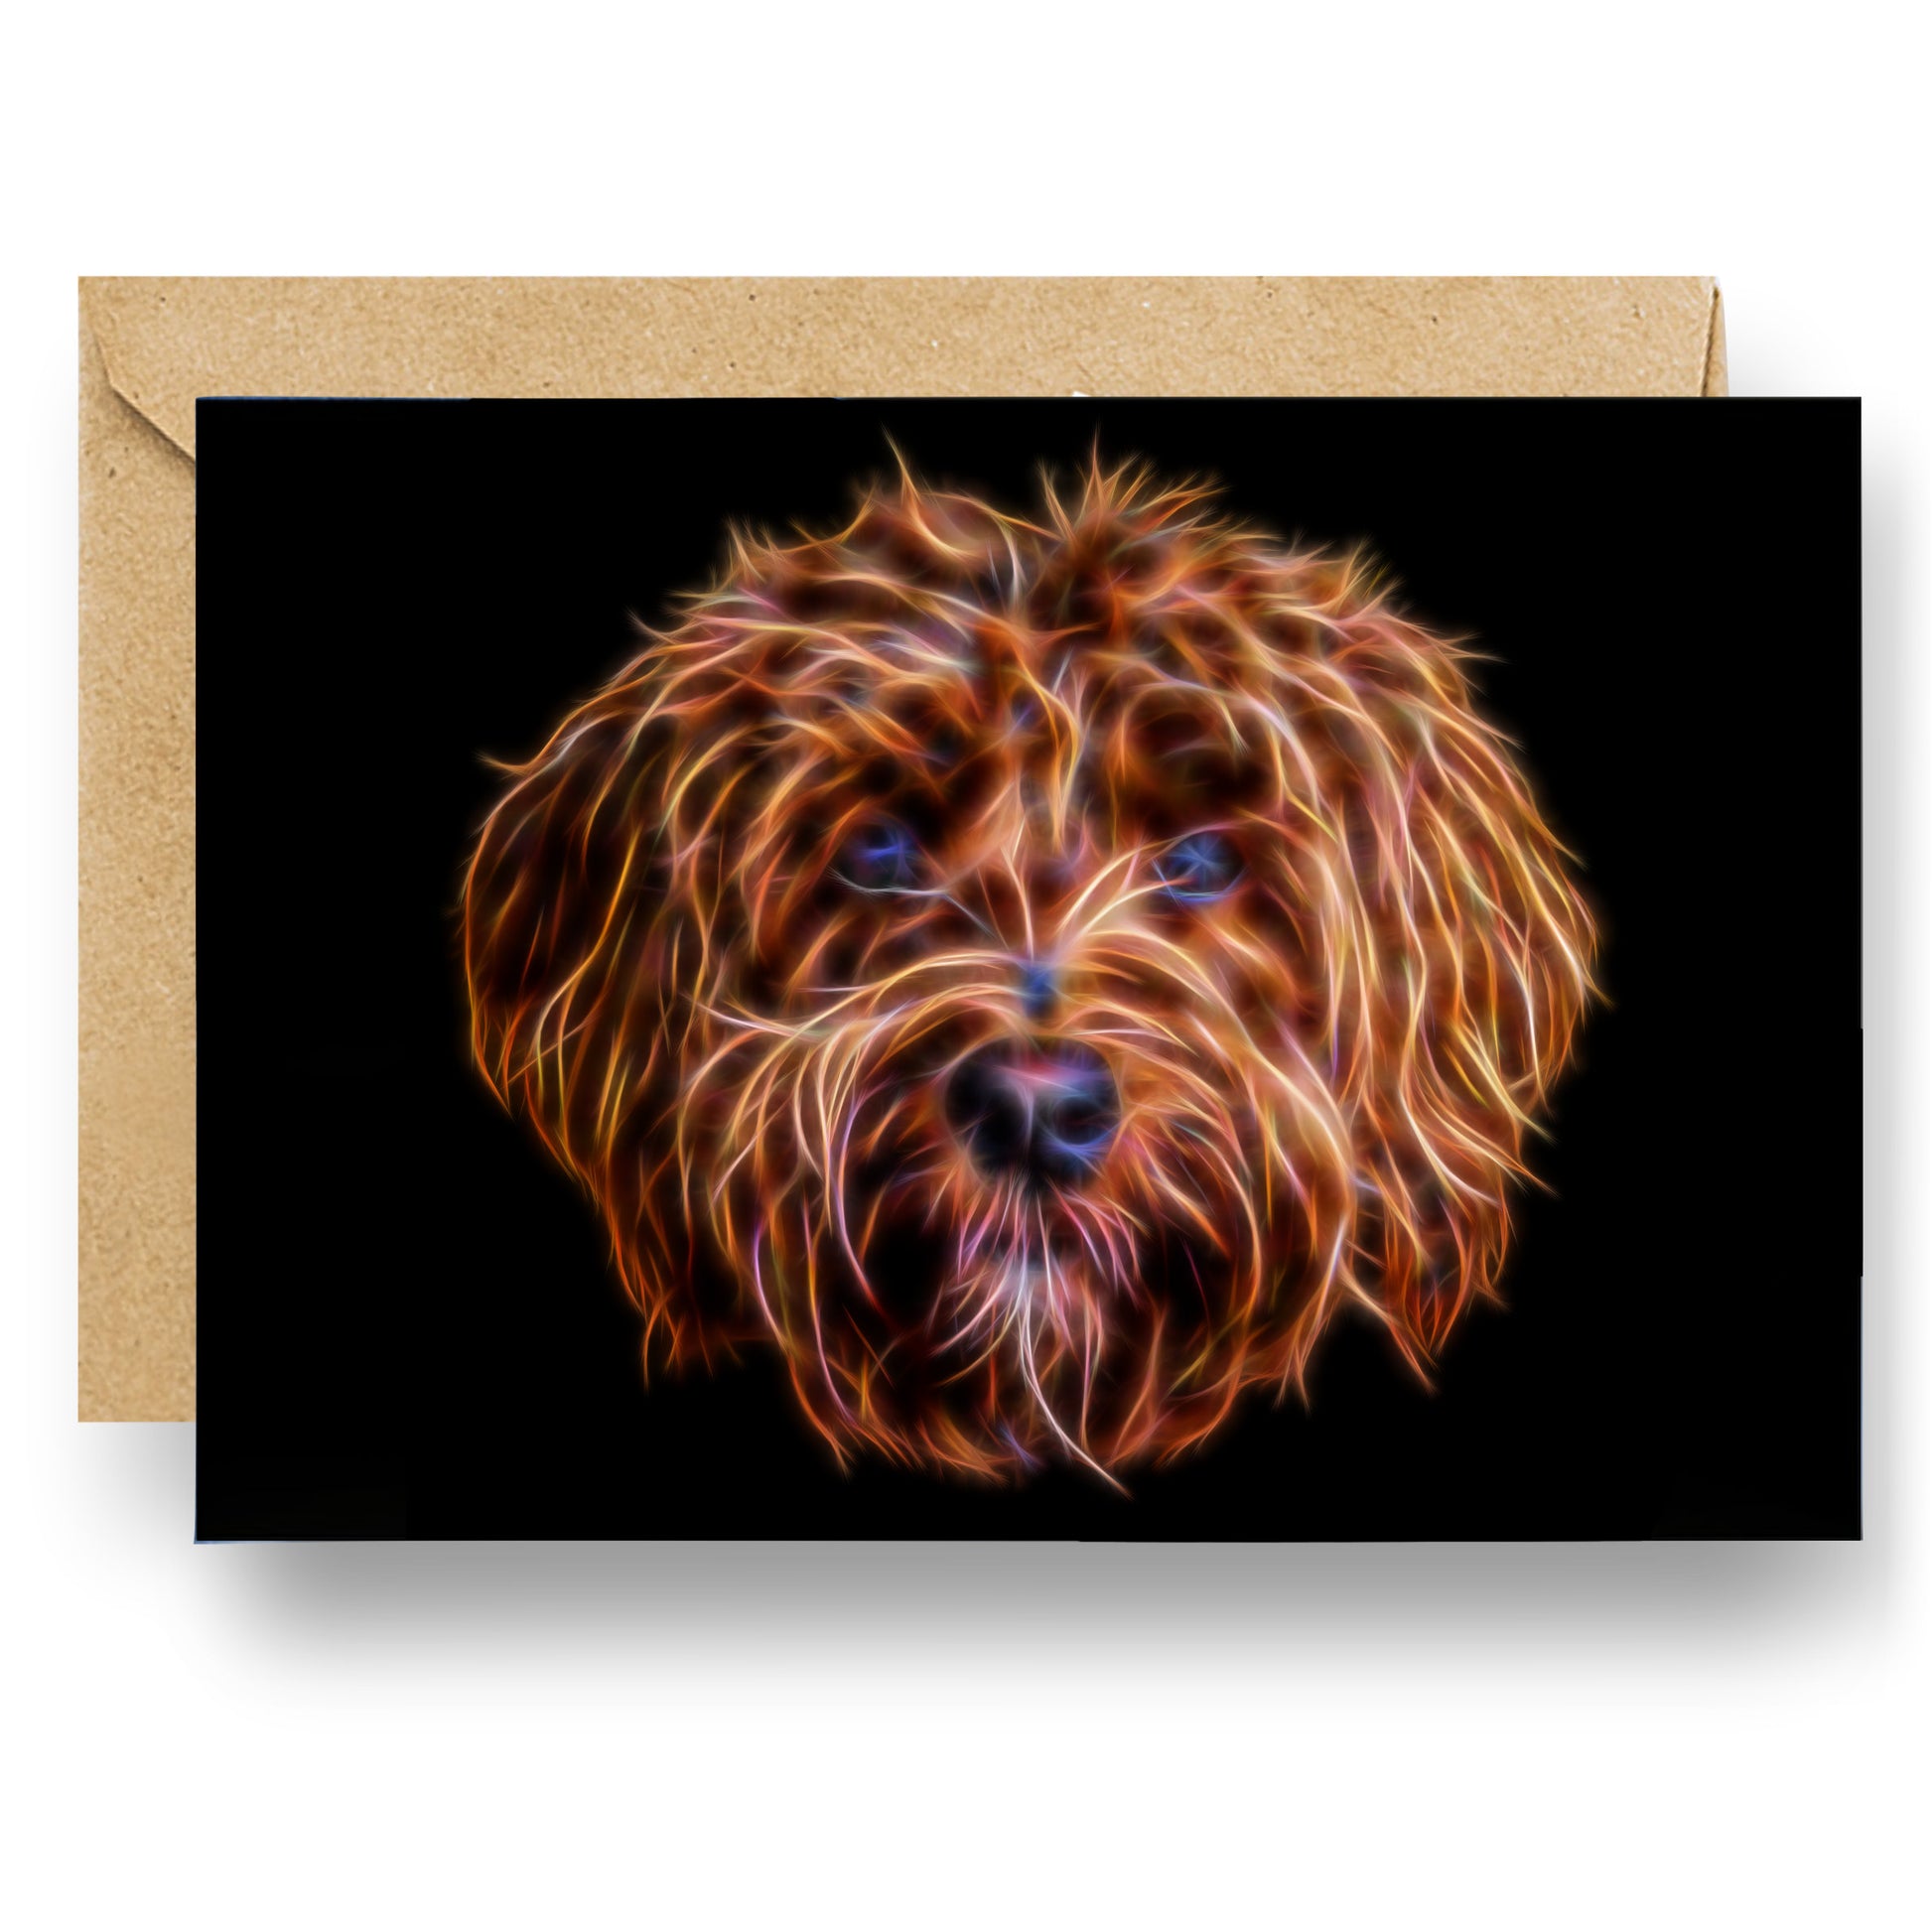 Red Labradoodle Greeting Card with Stunning Fractal Art Design